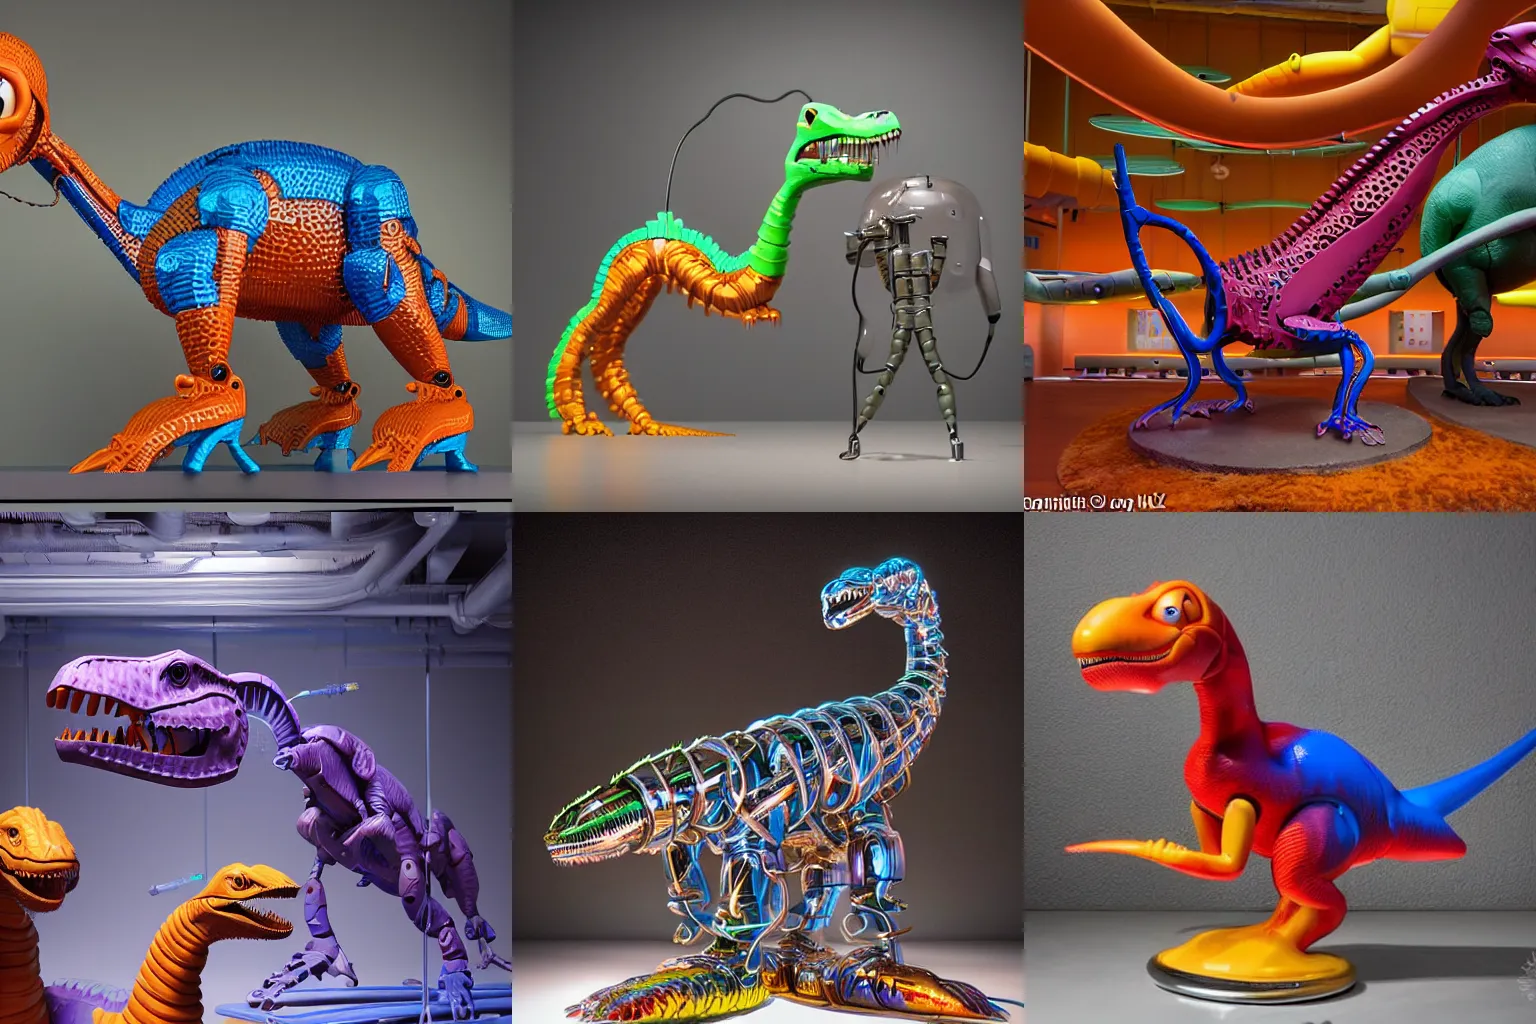 Prompt: A propaganda, plastic scales simple funny mechanic organic disney mechabot dinosaur toy characterdesign toy sculpture made from chrome cables, wires and tubes by moebius, by david lachapelle, by angus mckie, by rhads, by jeff koons, in an empty studio hollow, c4d